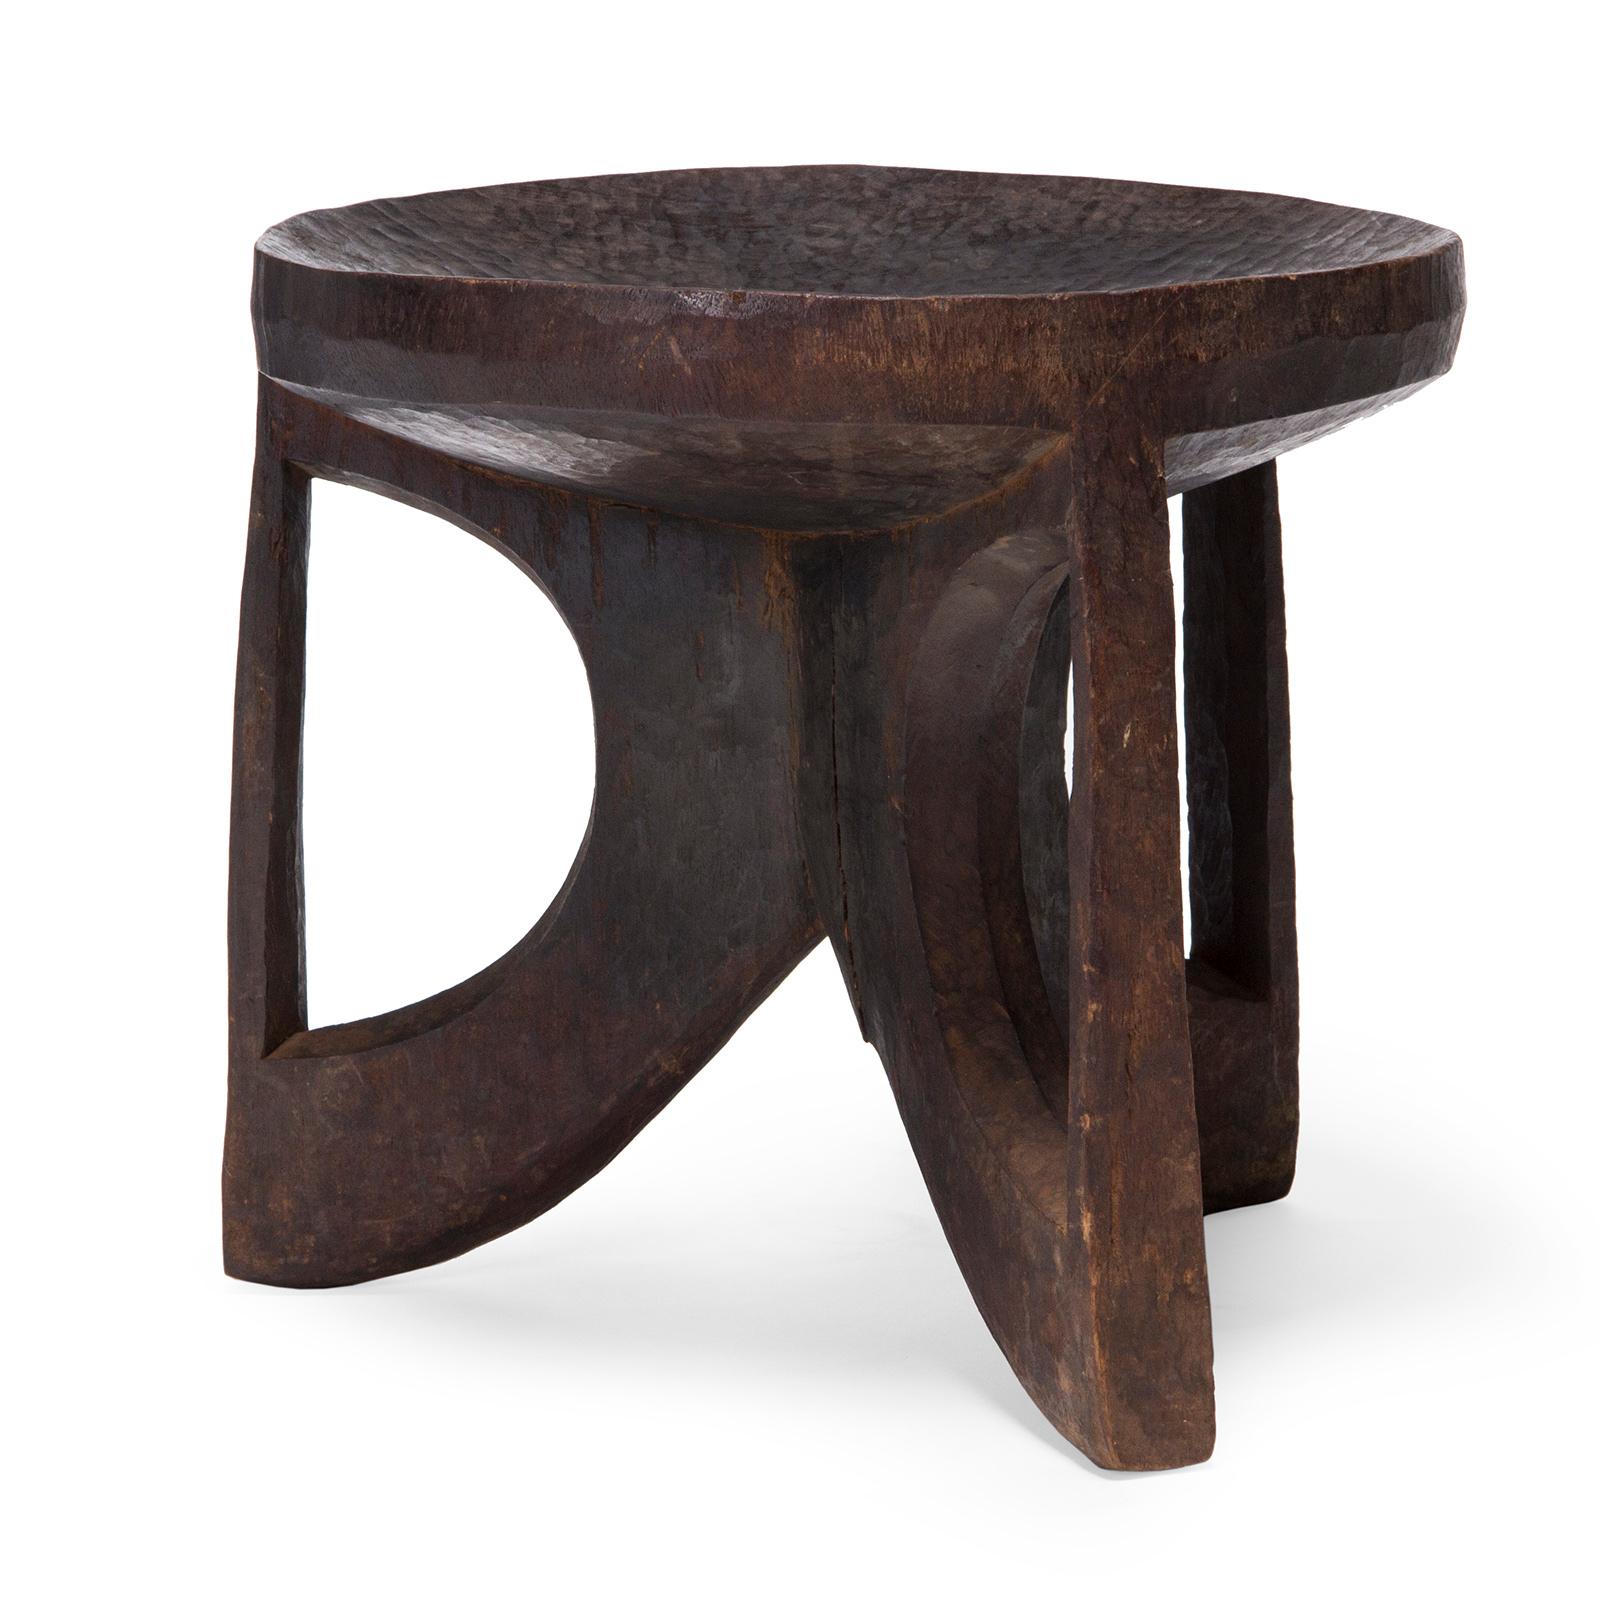 A three-legged stool carved from a single trunk of African hardwood.